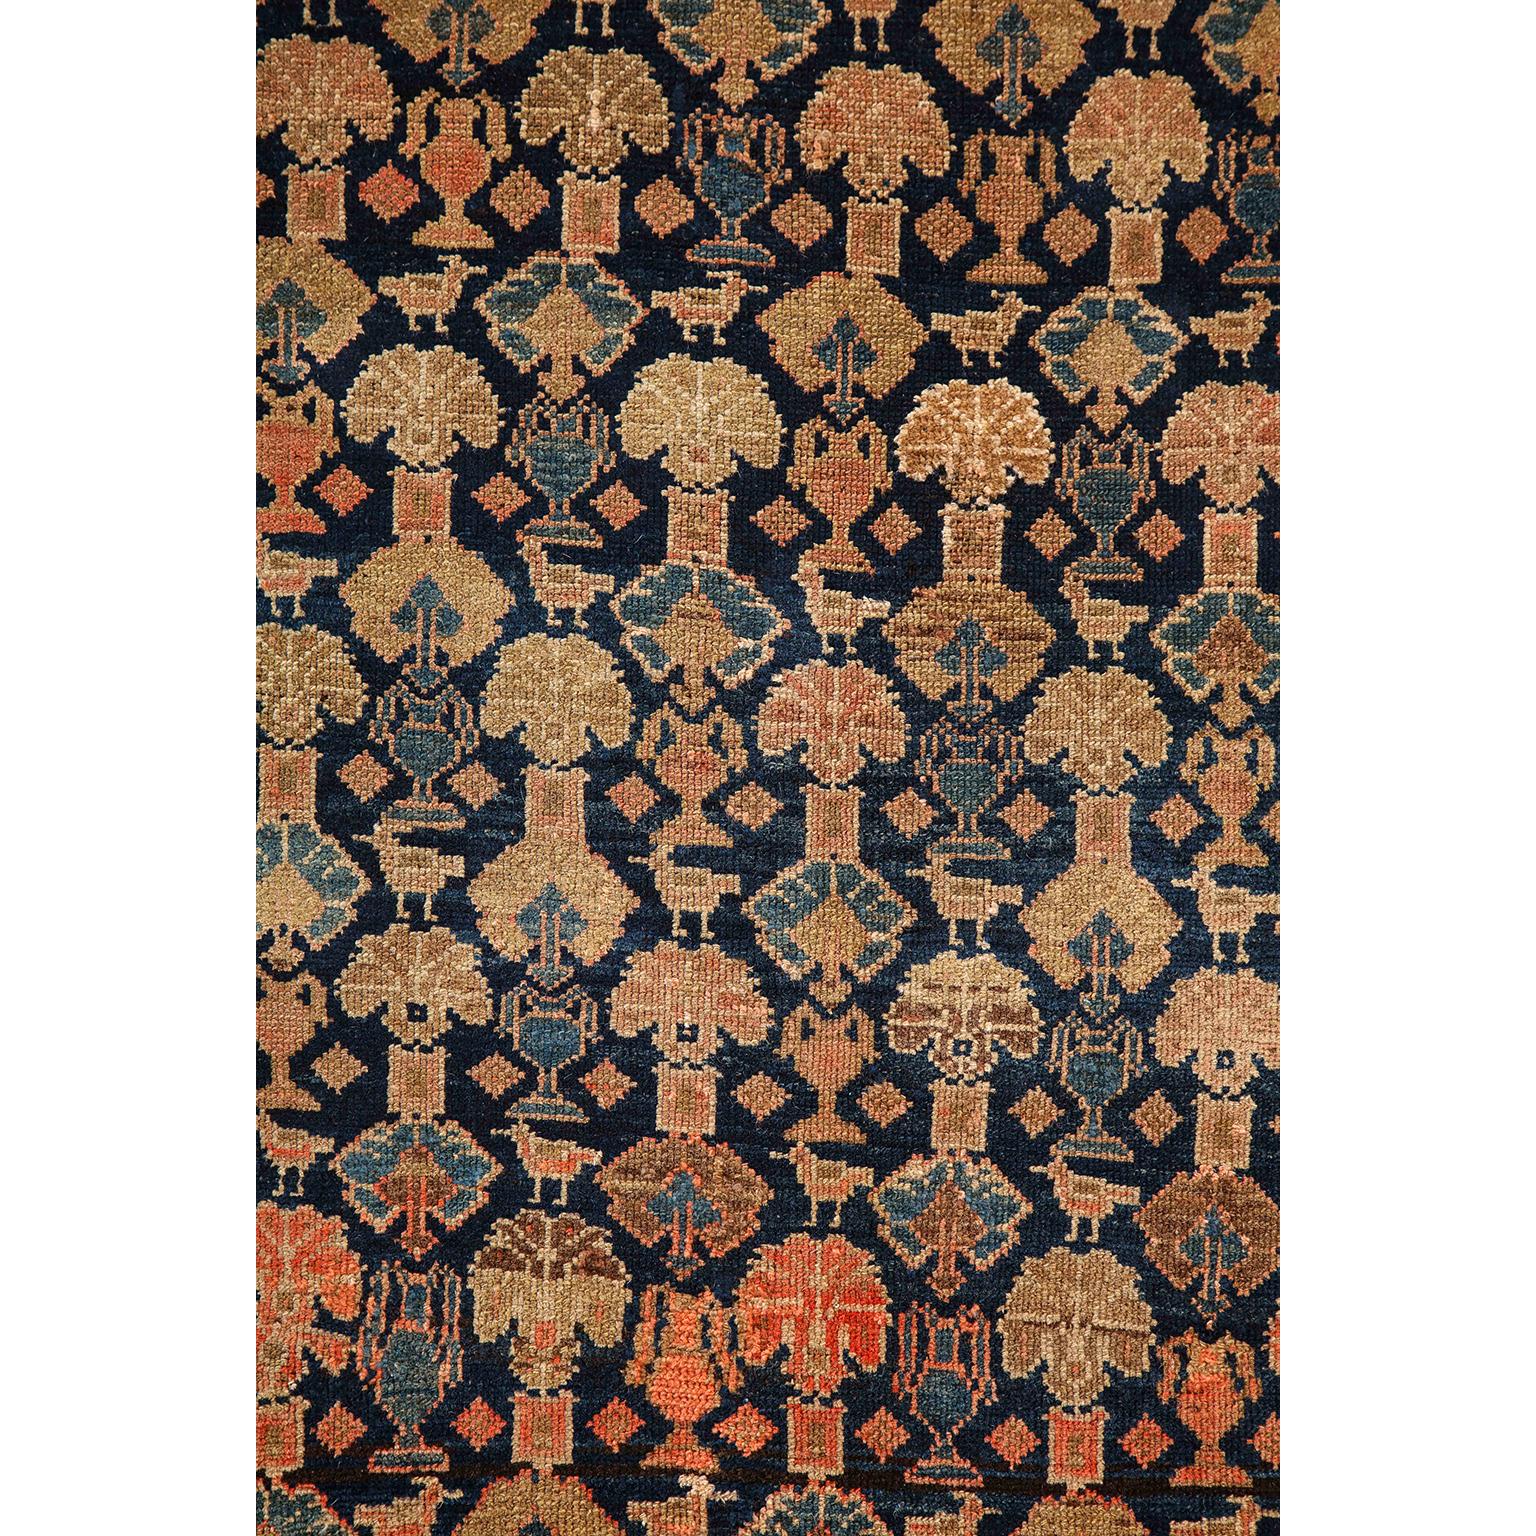 Vegetable Dyed Antique 1900s Persian Malayer Rug, Flower Motifs, 5' x 7' For Sale